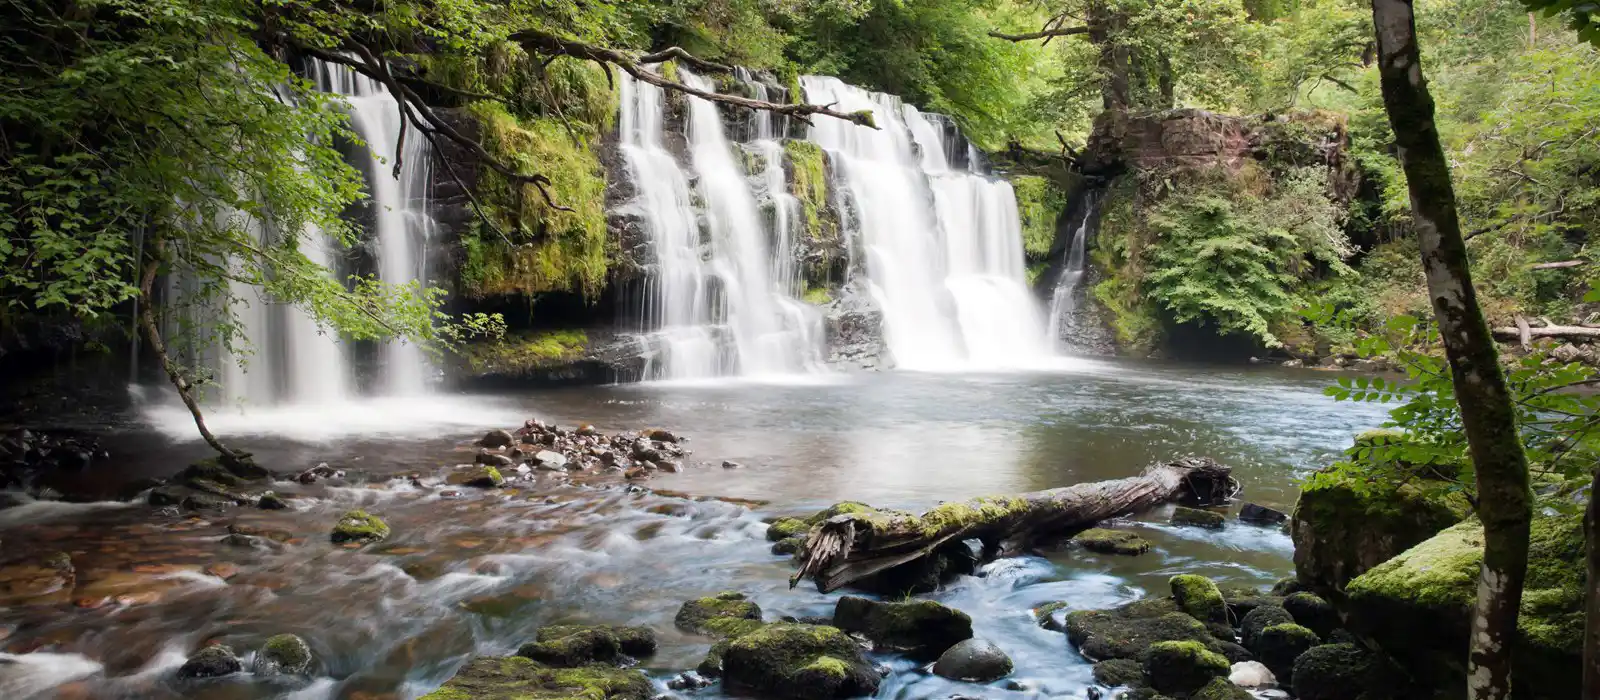 A waterfall on the Melte River in the Brecon Beacons